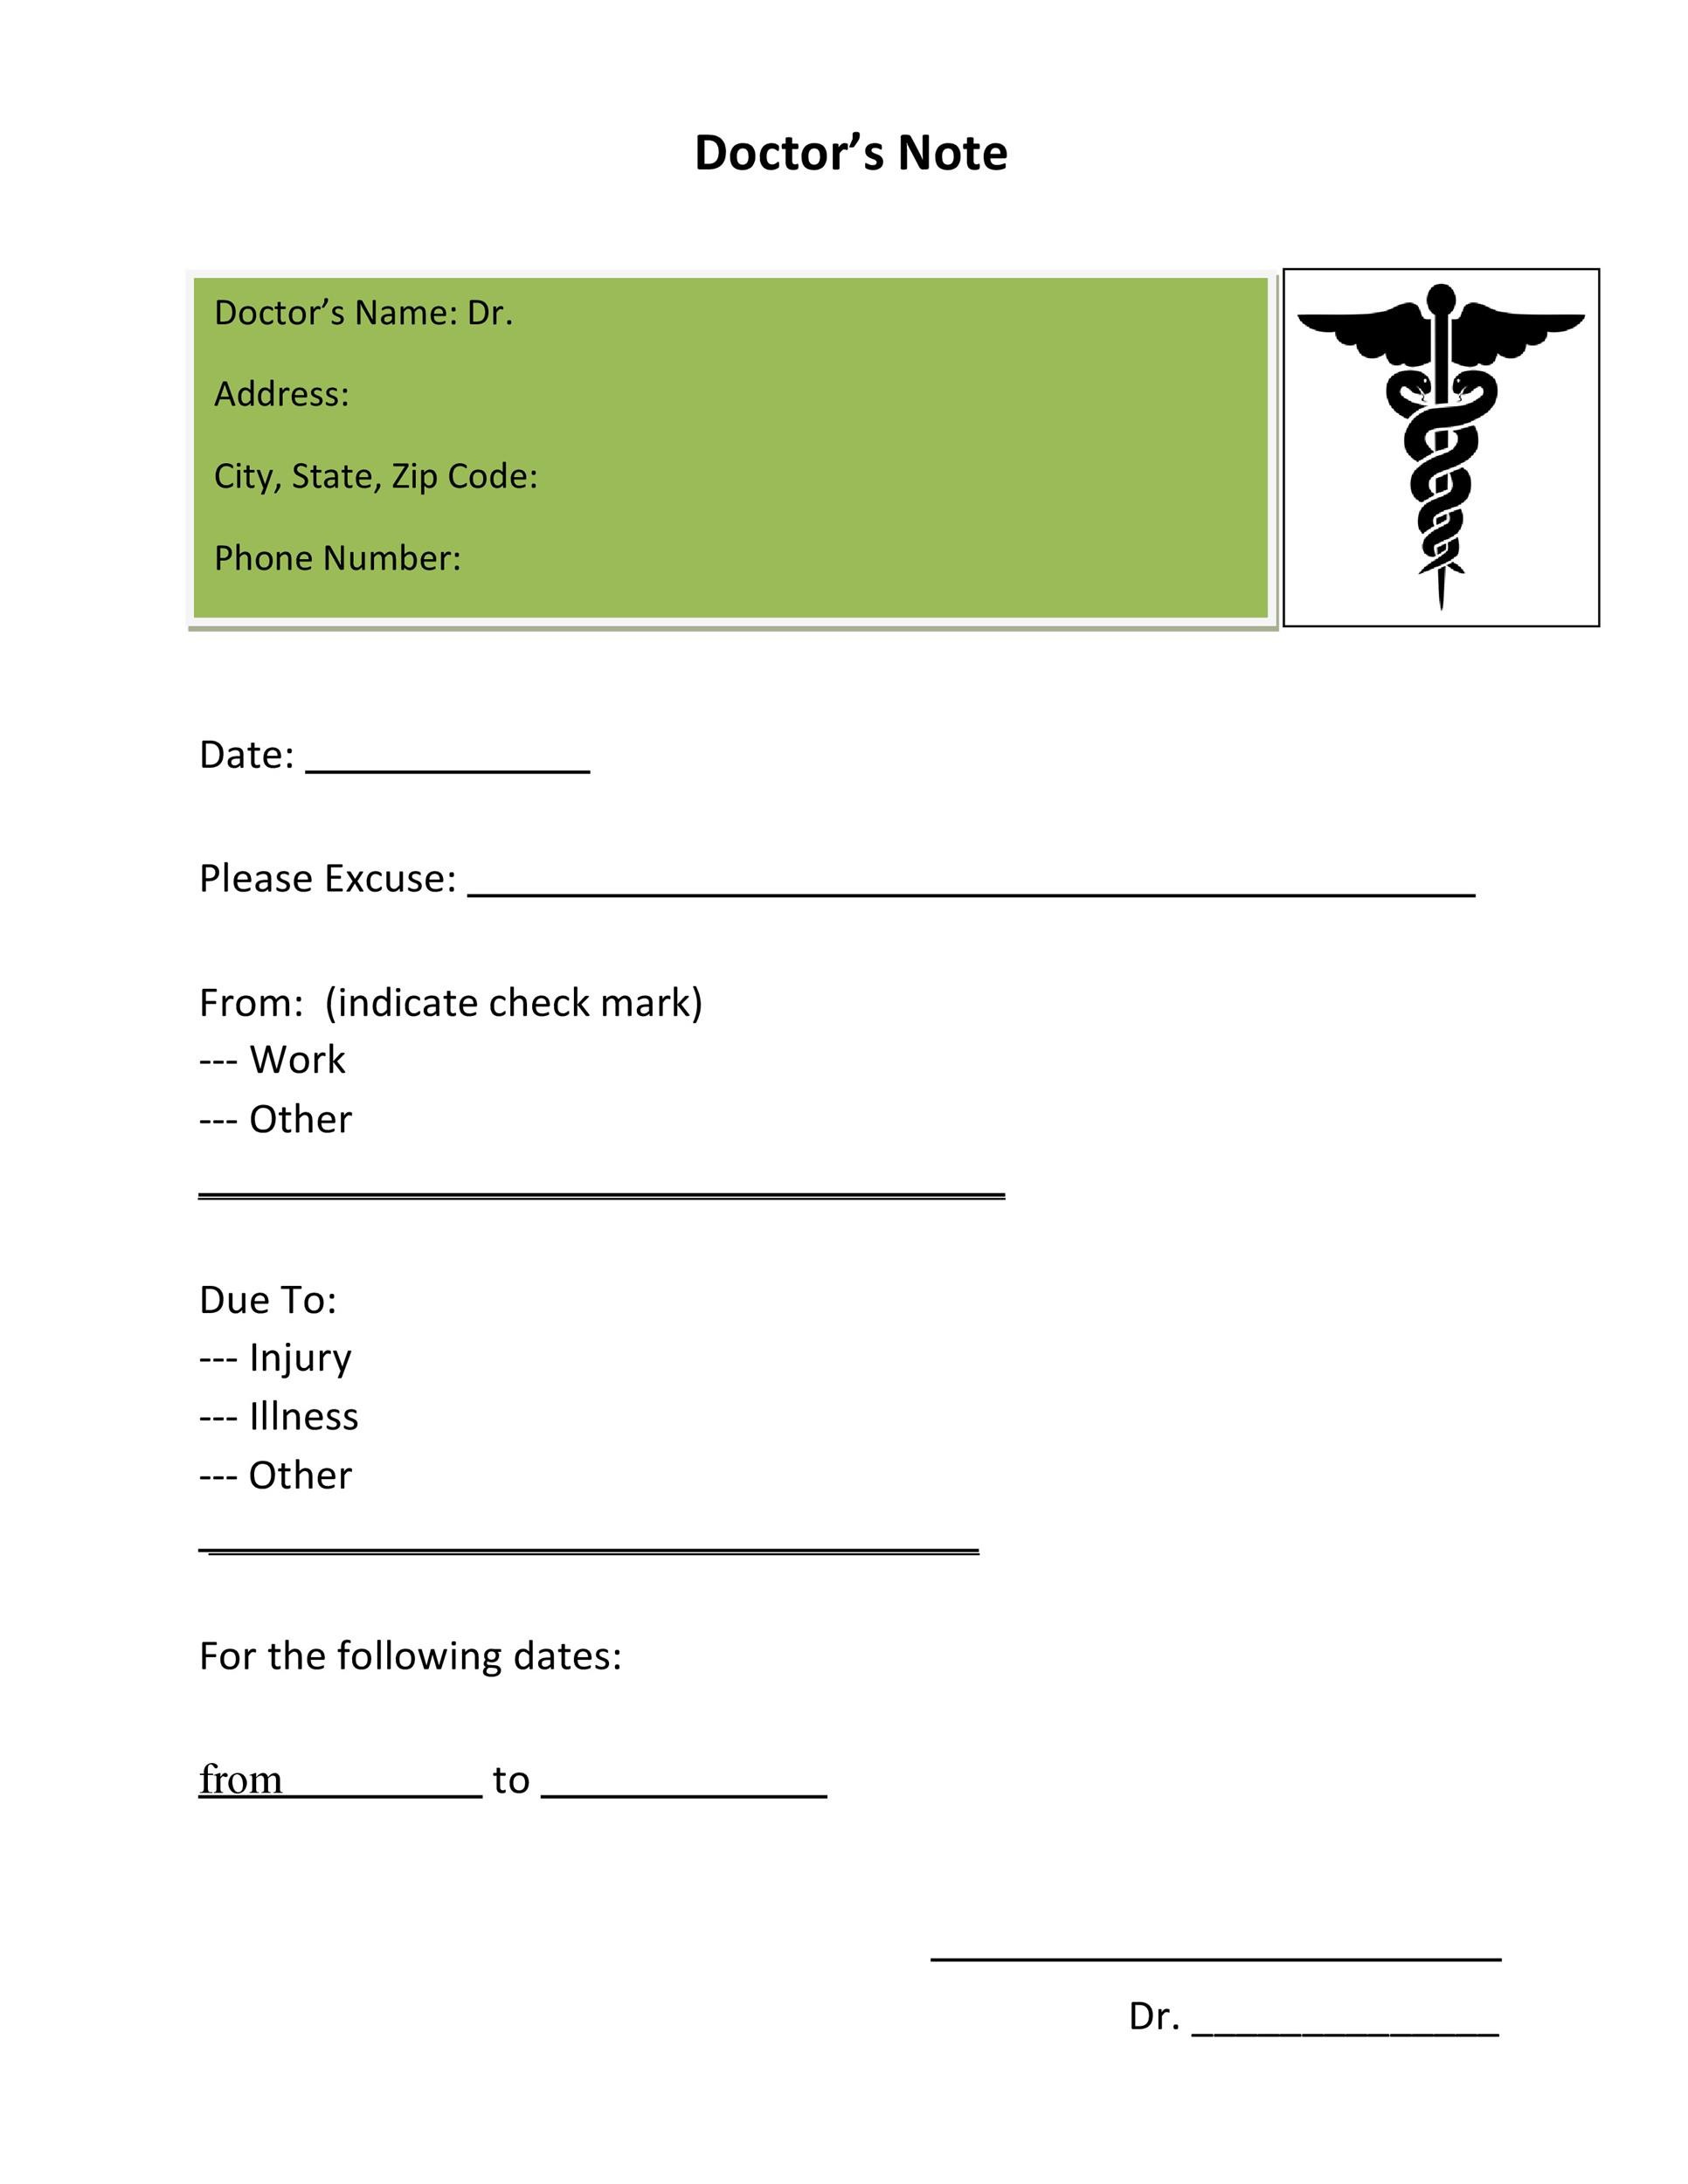 Doctors Excuse For Work Template